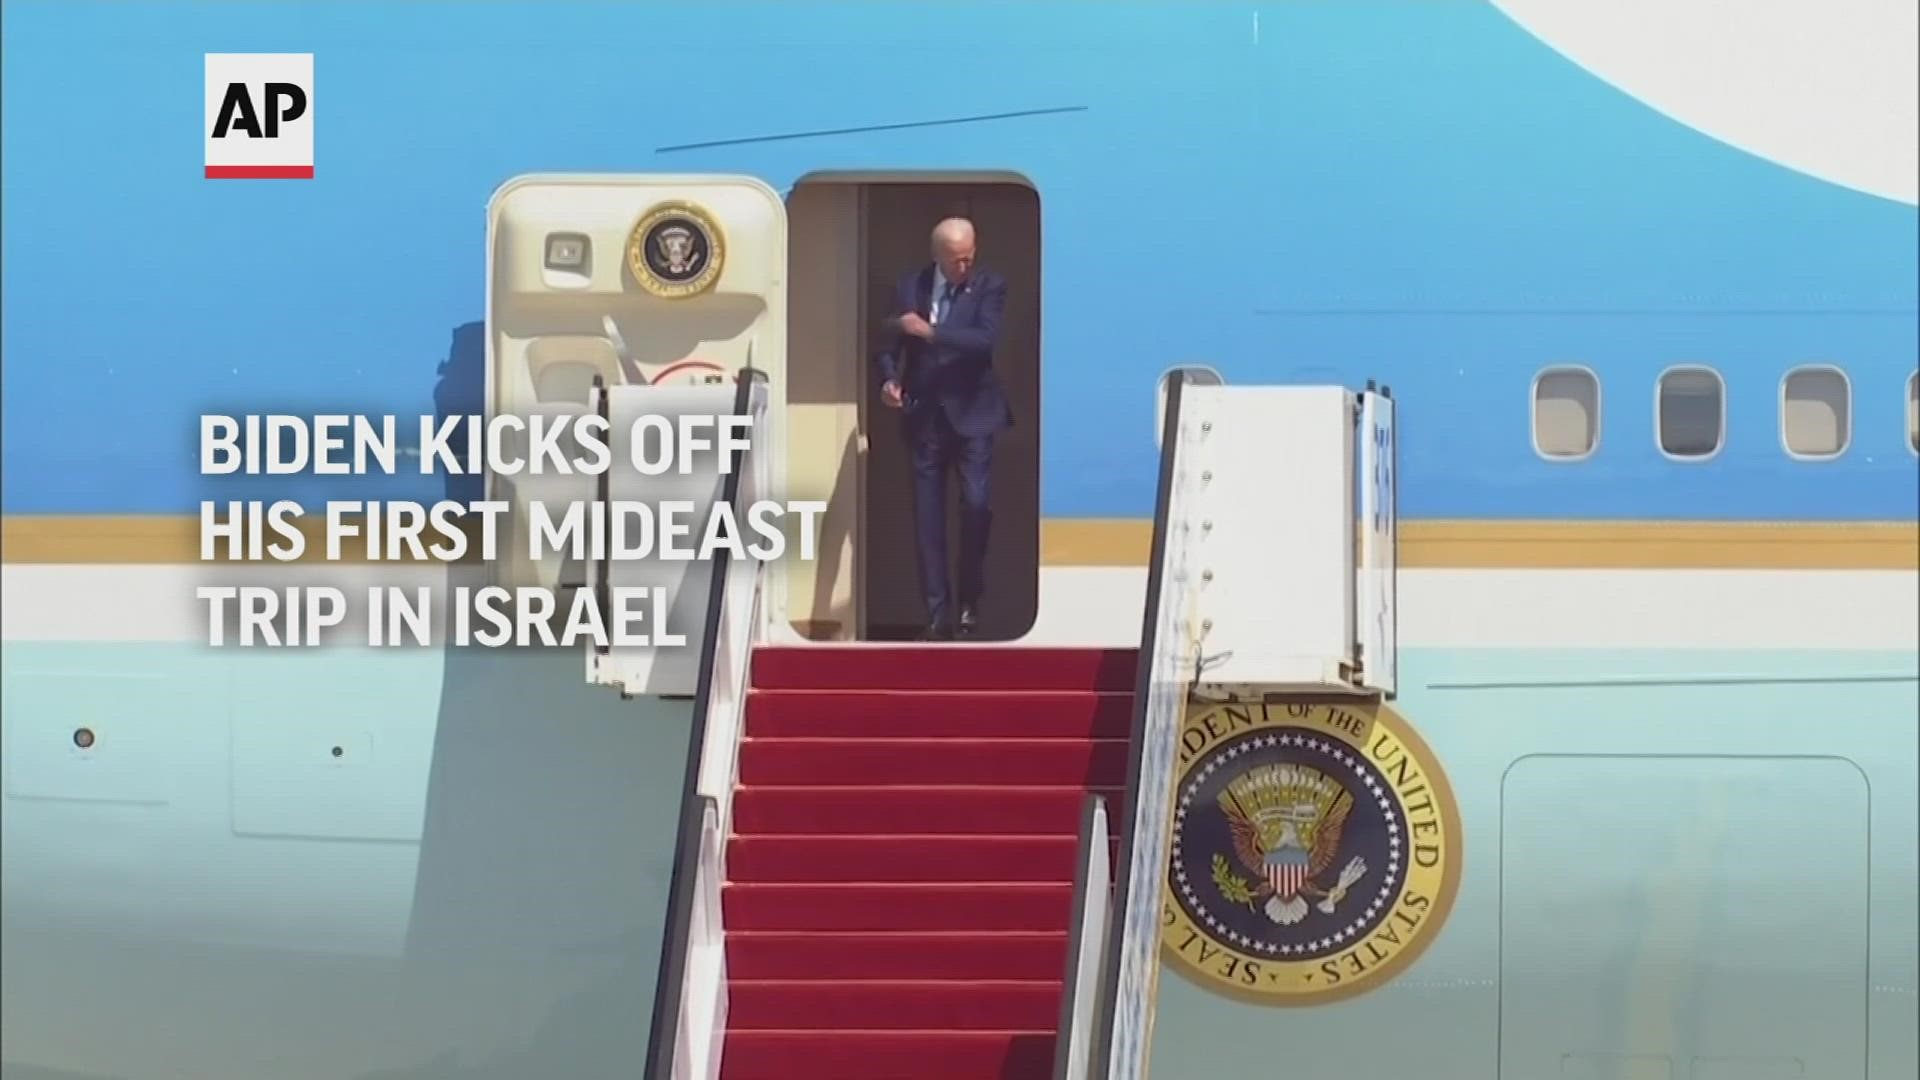 Biden is spending two days in Jerusalem for talks with Israeli leaders before meeting Palestinian President Mahmoud Abbas on Friday, then heads to Saudi Arabia.